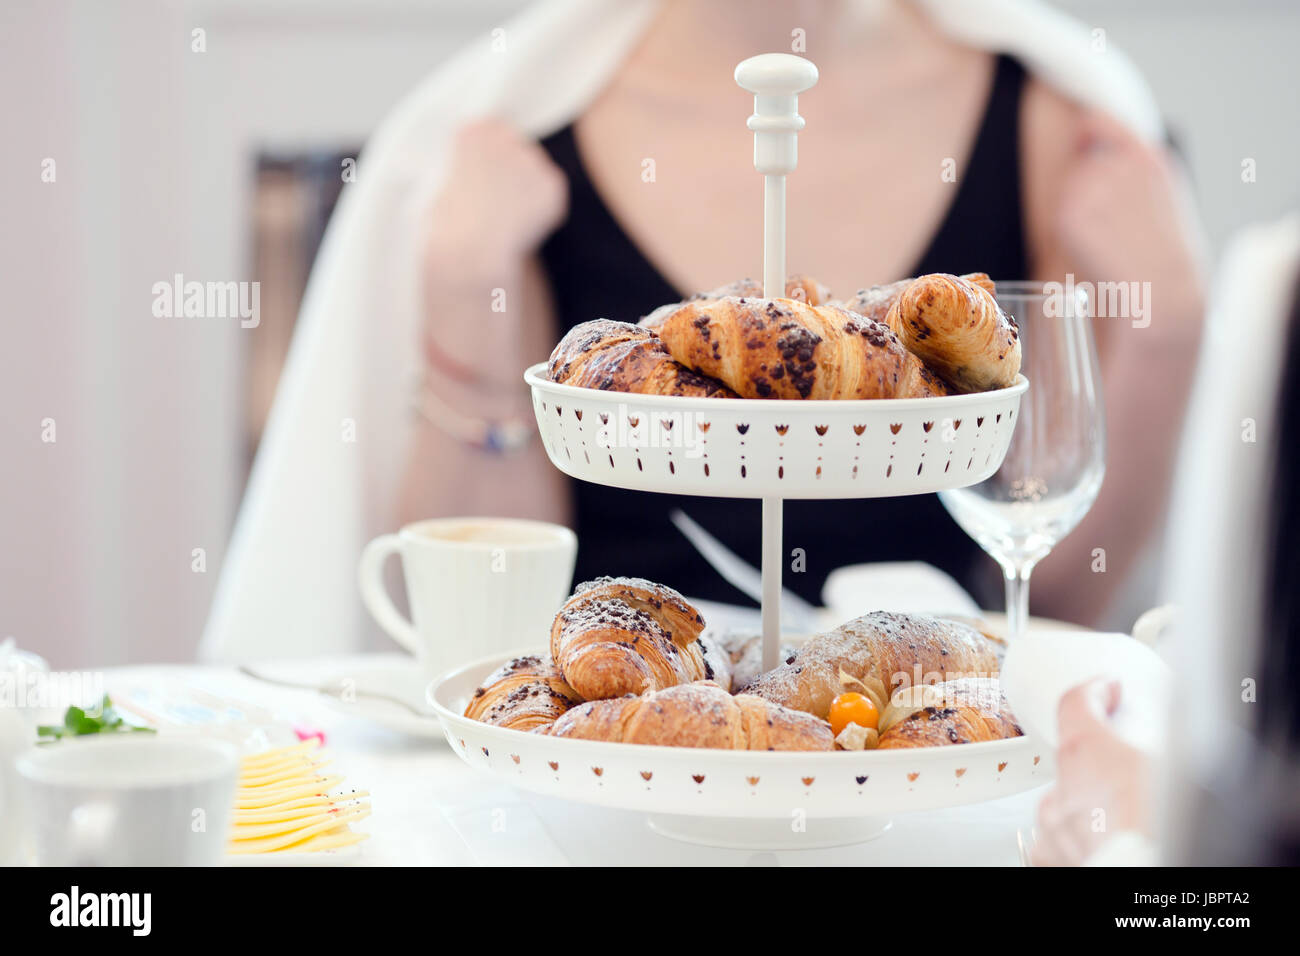 Plate with baked buns Stock Photo